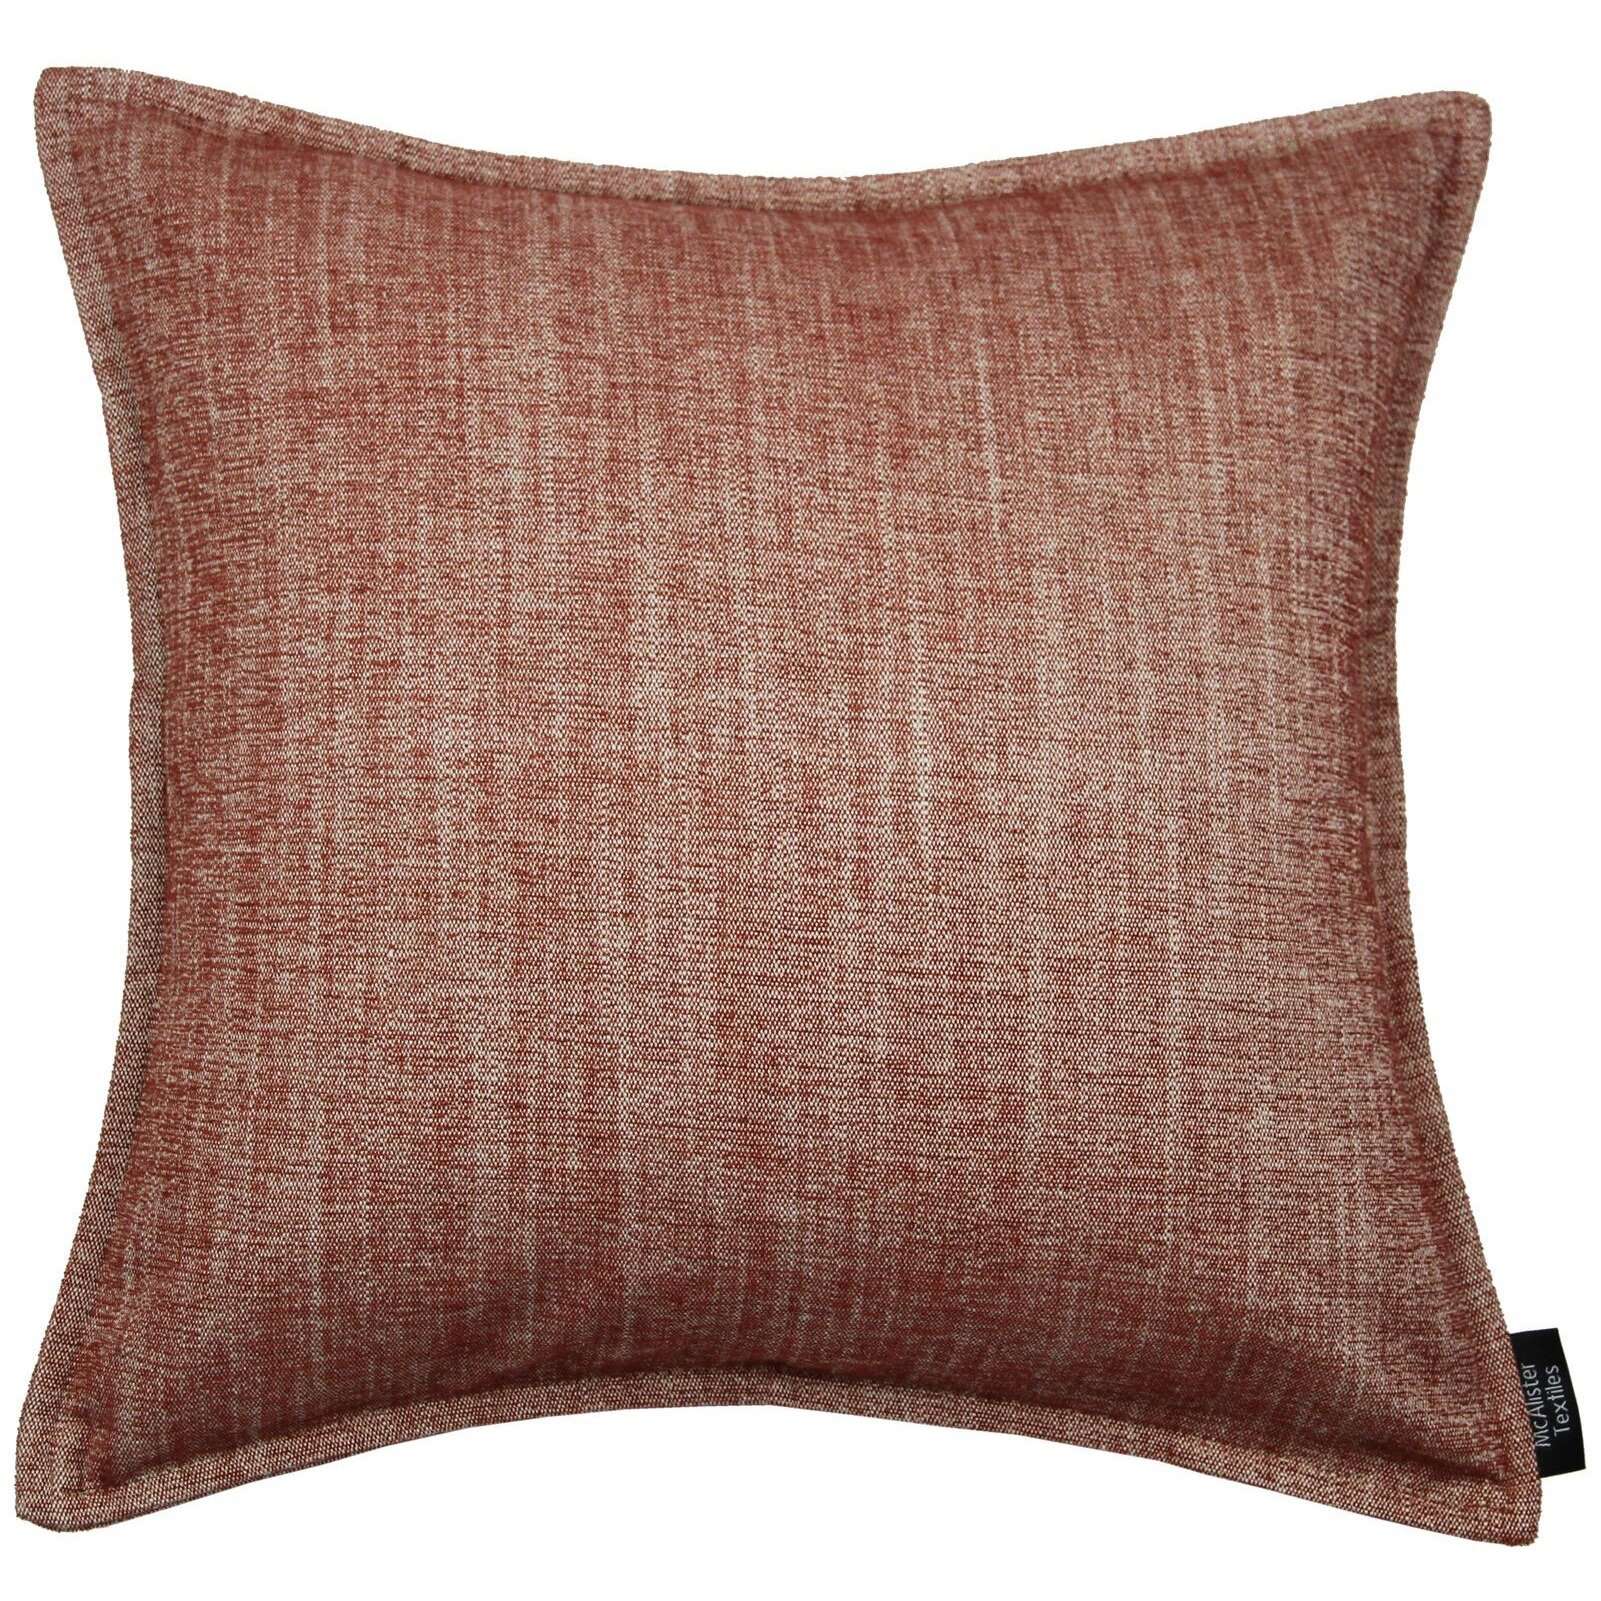 McAlister Textiles Rhumba Burnt Orange Cushion Cushions and Covers Cover Only 43cm x 43cm 